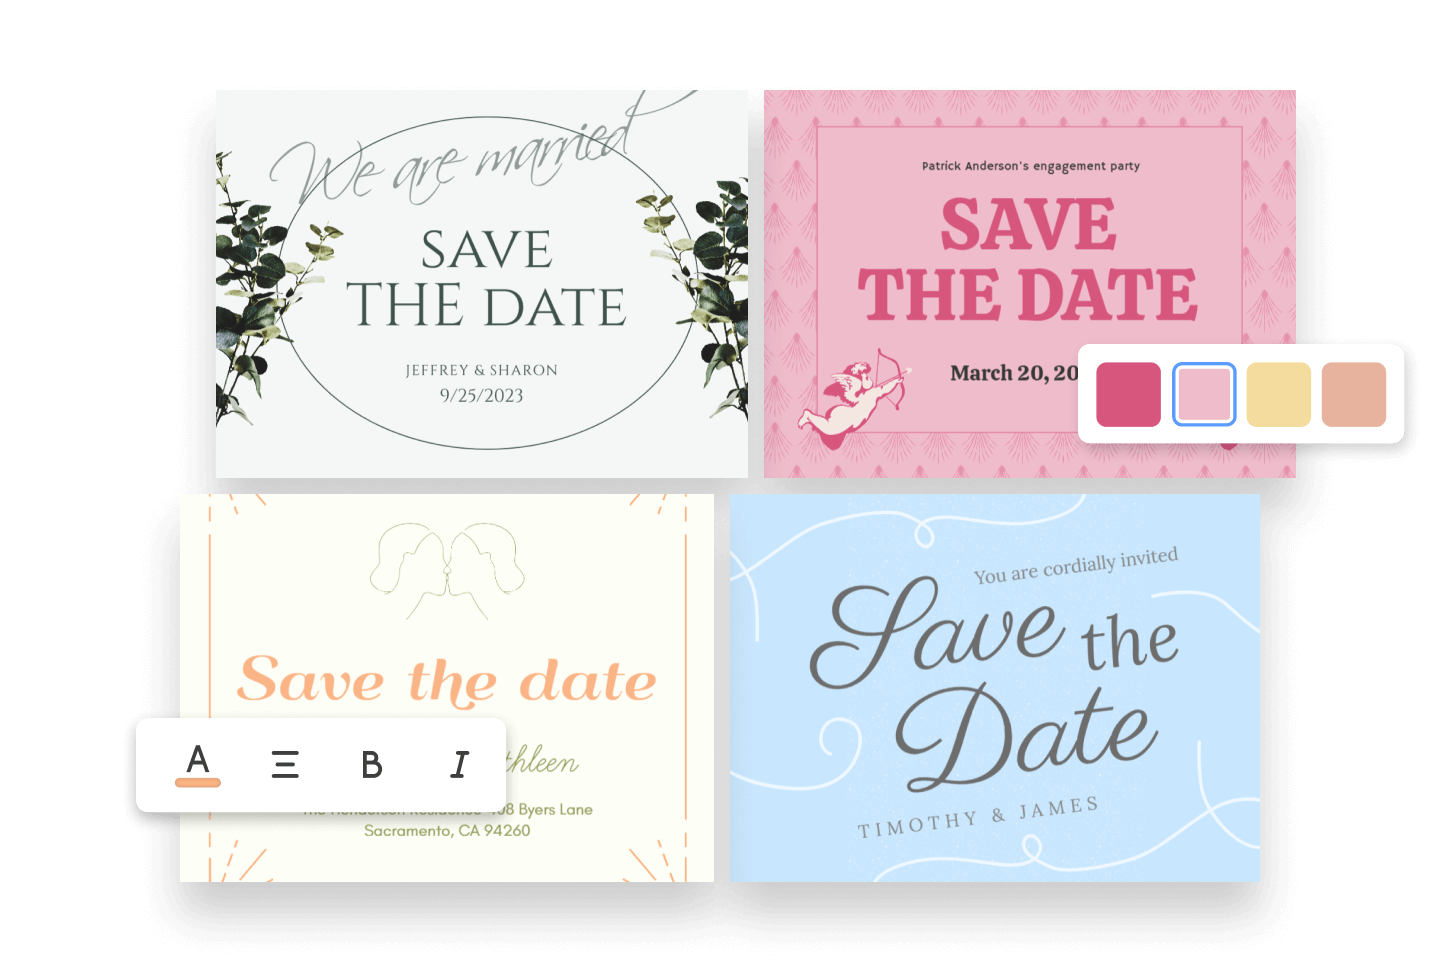 Save the date card banner